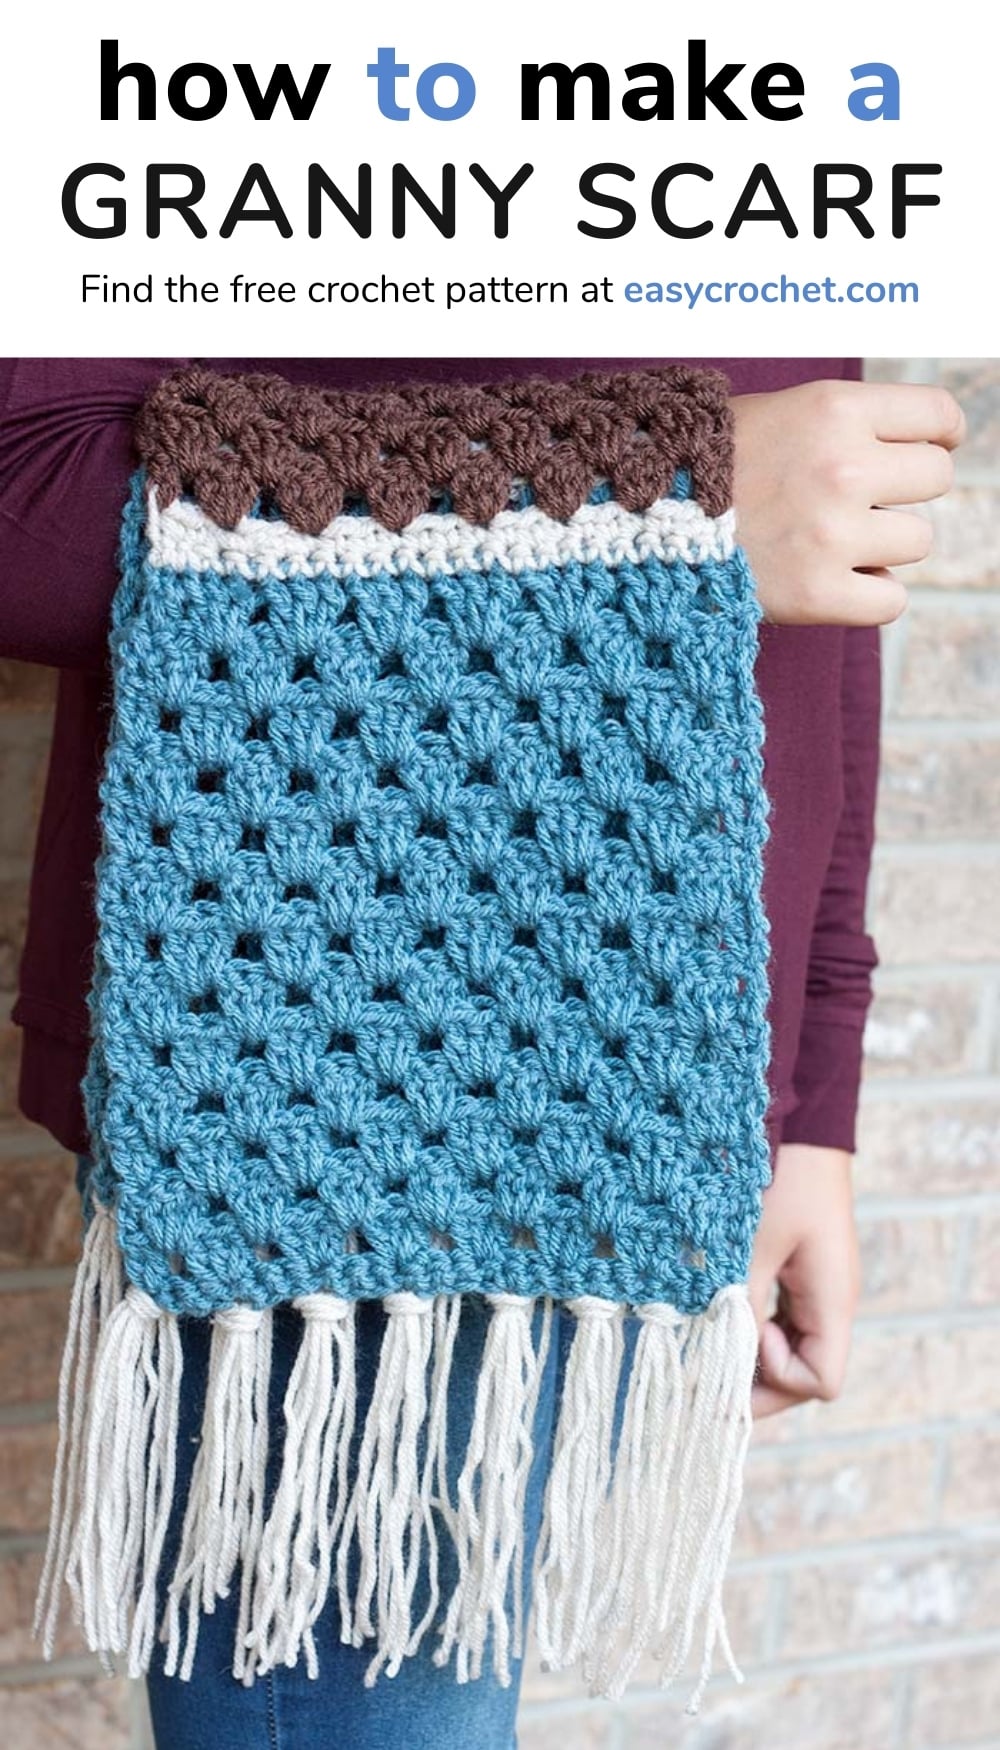 Learn how to make a granny stitch scarf with this free crochet scarf pattern! Find the free design at easycrochet.com